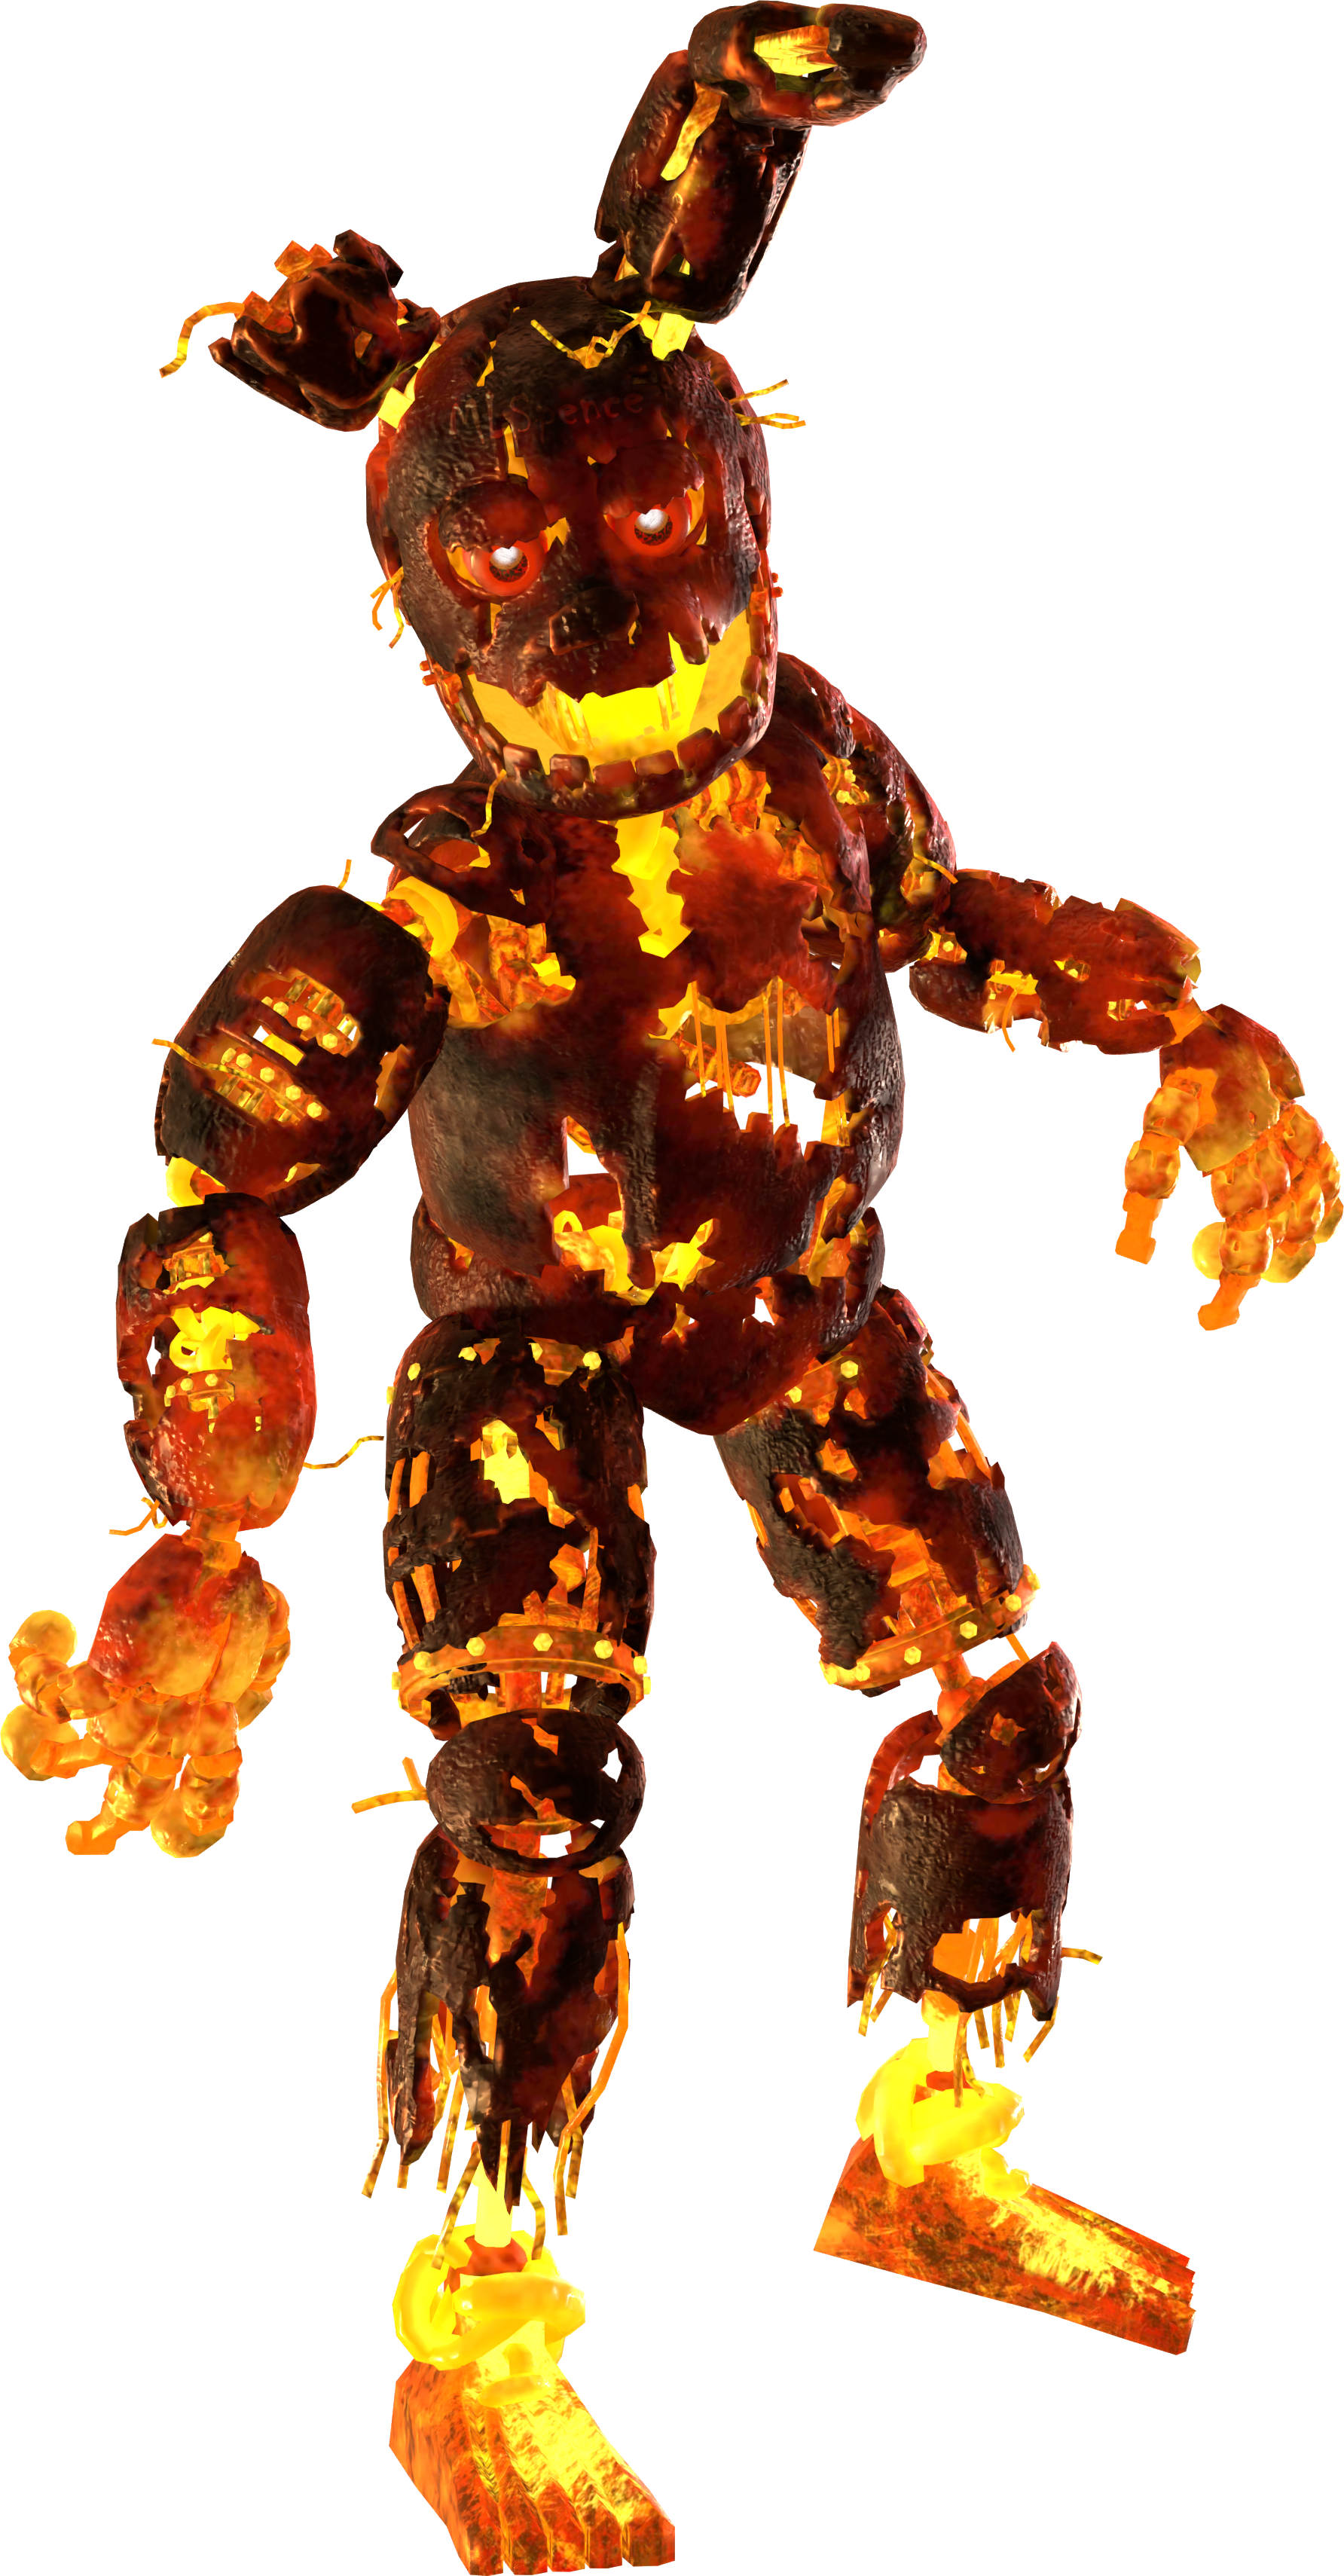 https://static.wikia.nocookie.net/fnaf-ar/images/c/c3/Ba132zu61vg51.png/revision/latest?cb=20210211124052